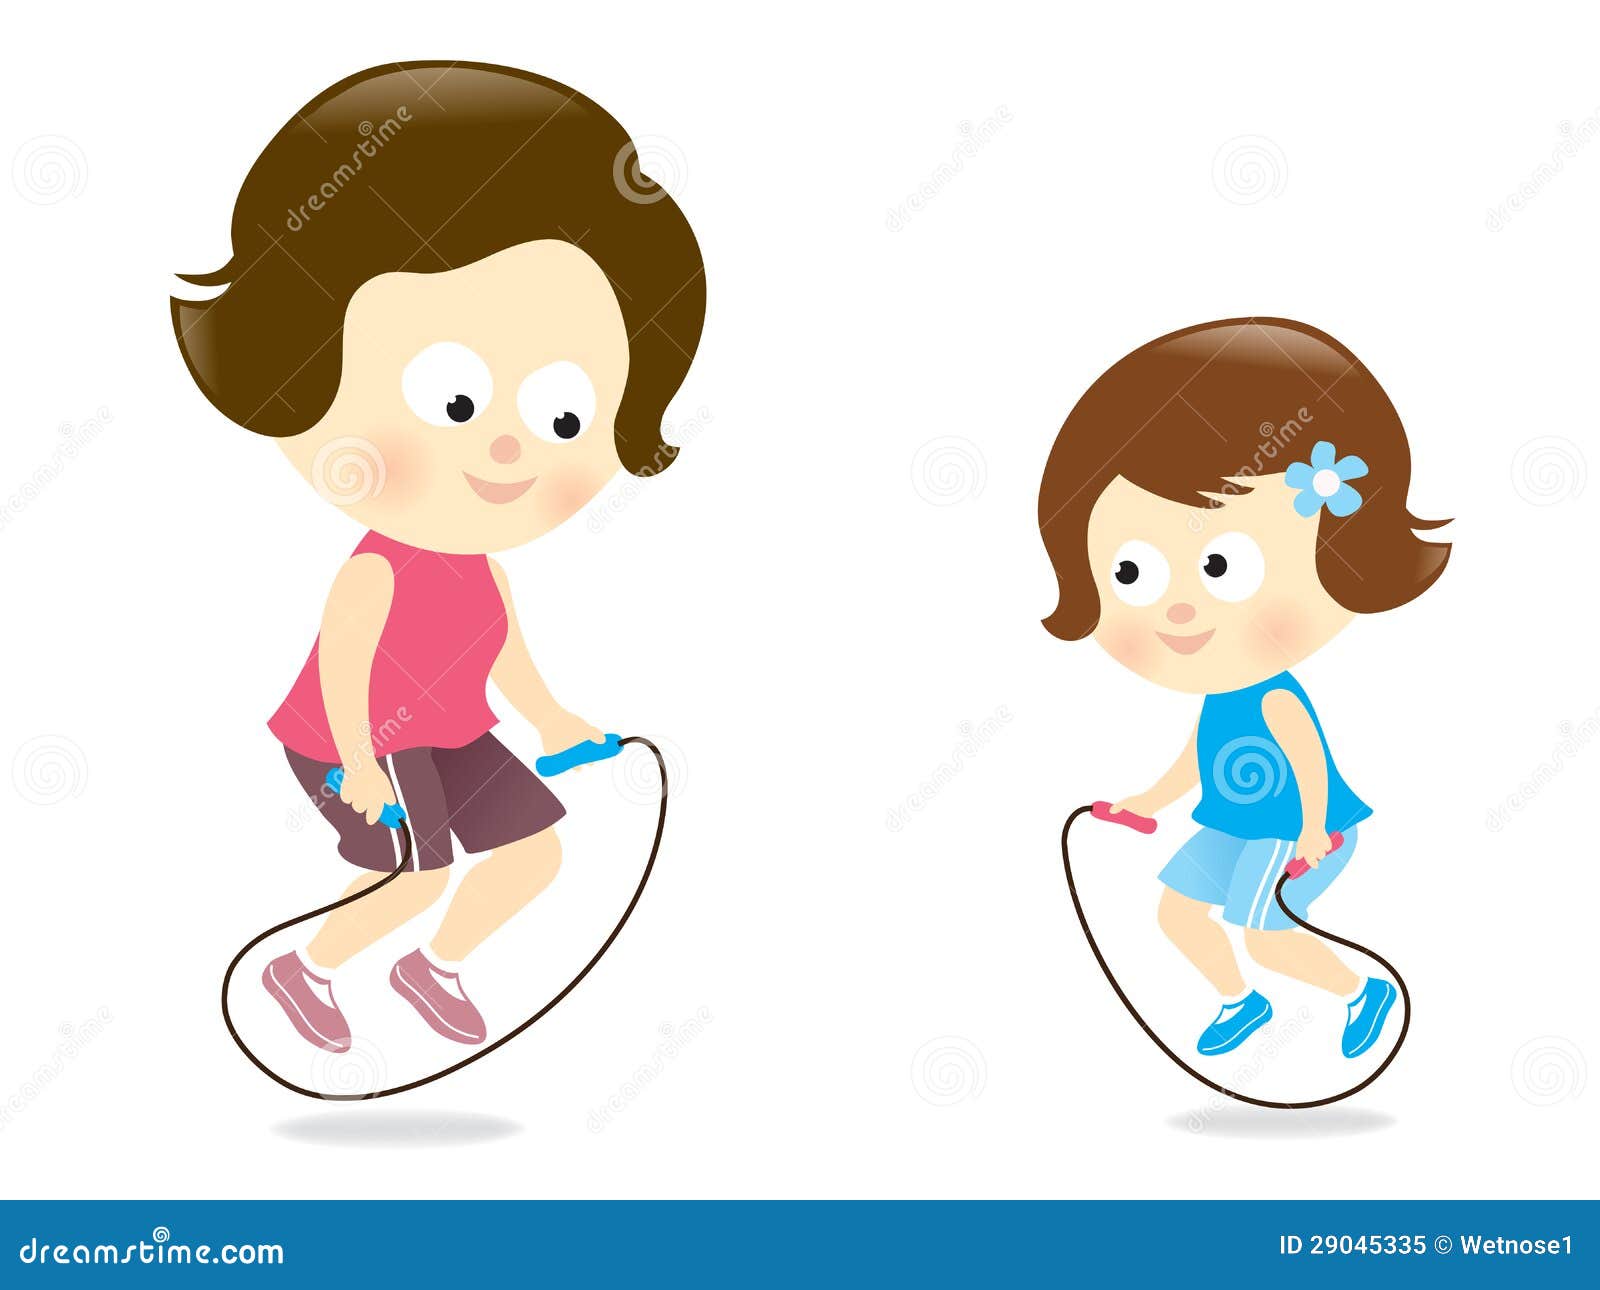 animated clip art jumping rope - photo #11